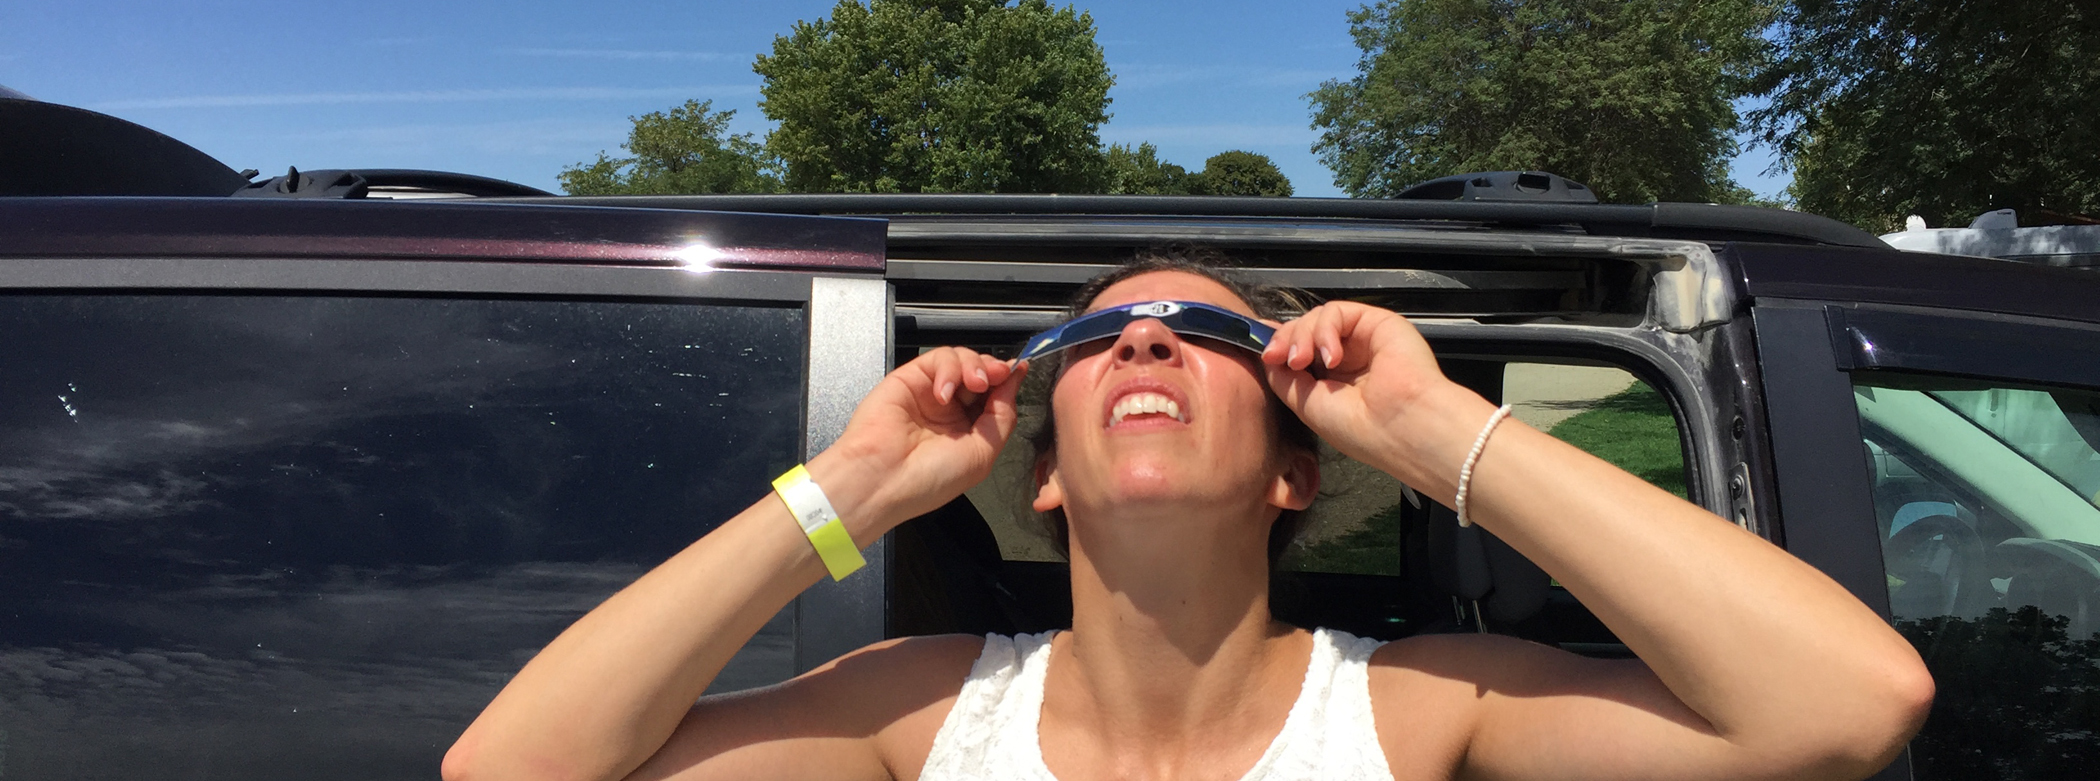 A woman observes a solar eclipse with safe eclipse glasses.